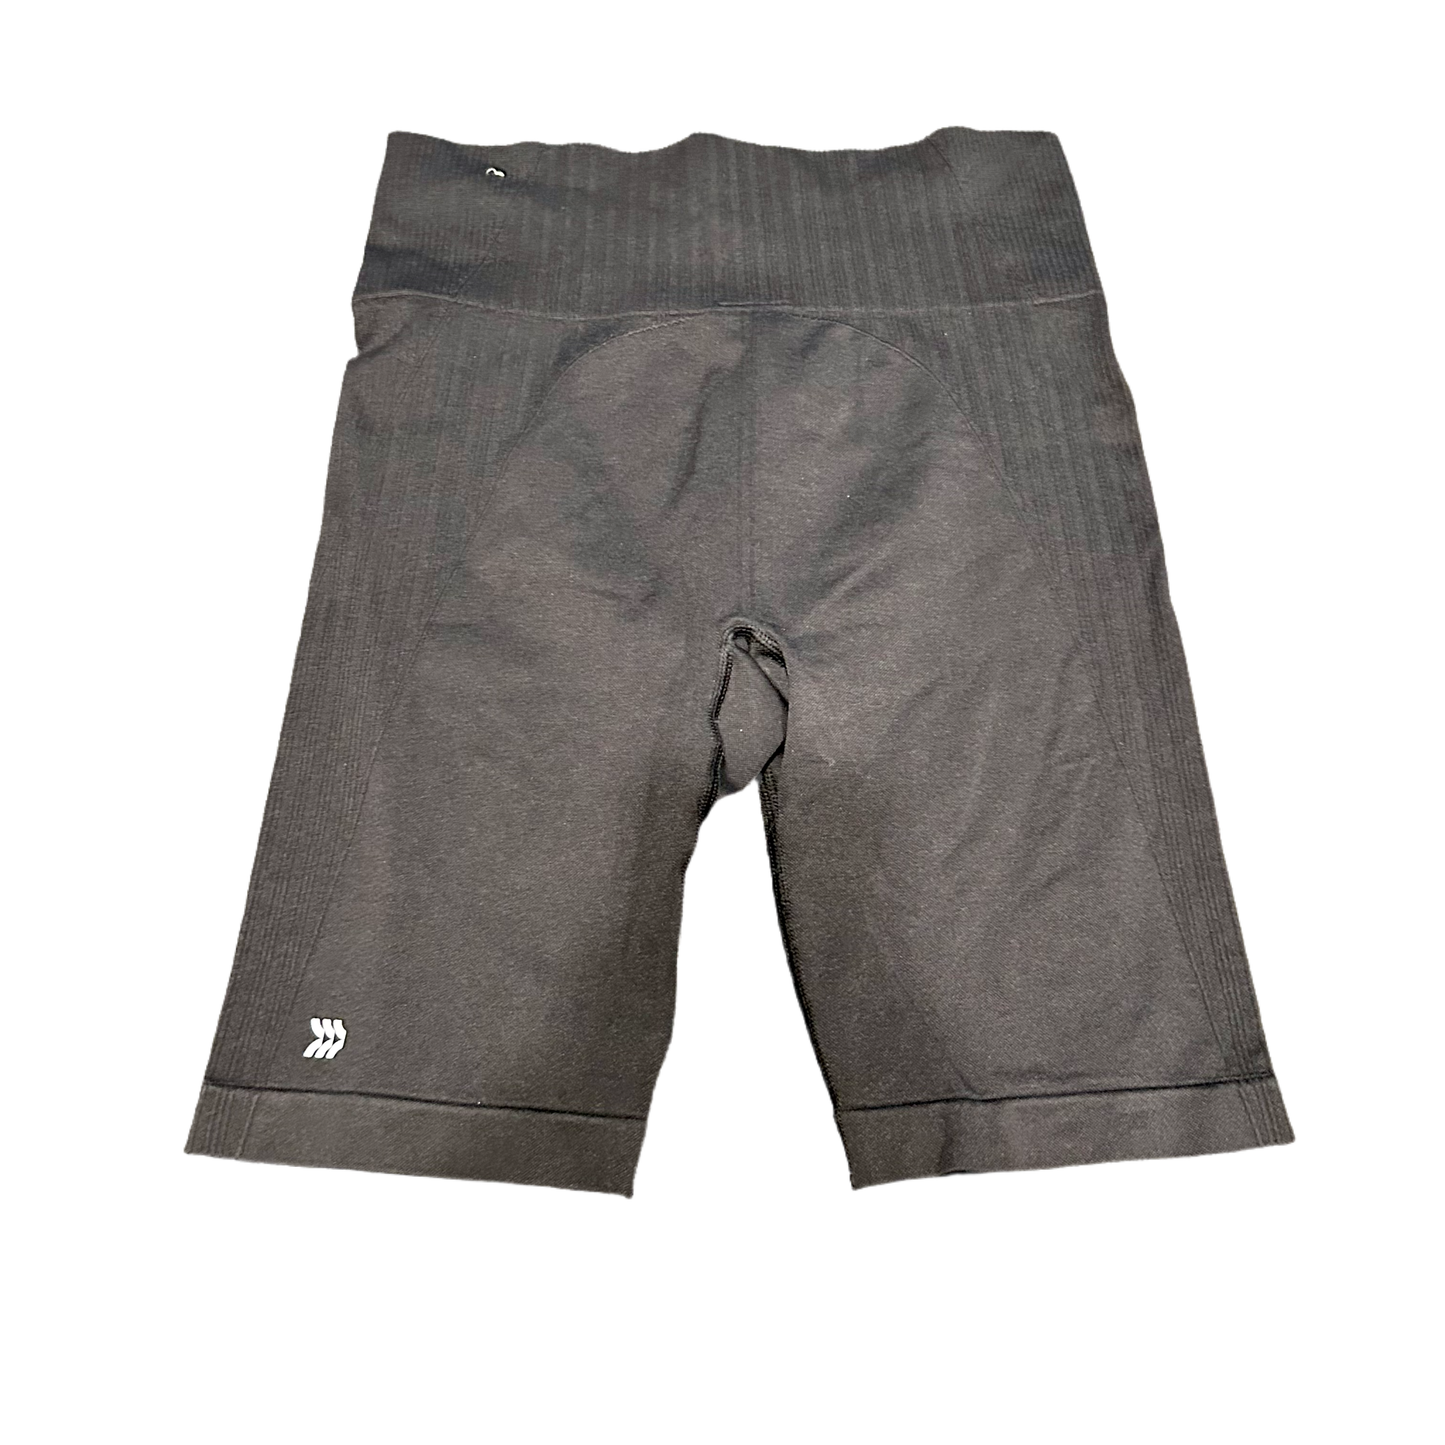 Black Athletic Shorts By All In Motion, Size: M